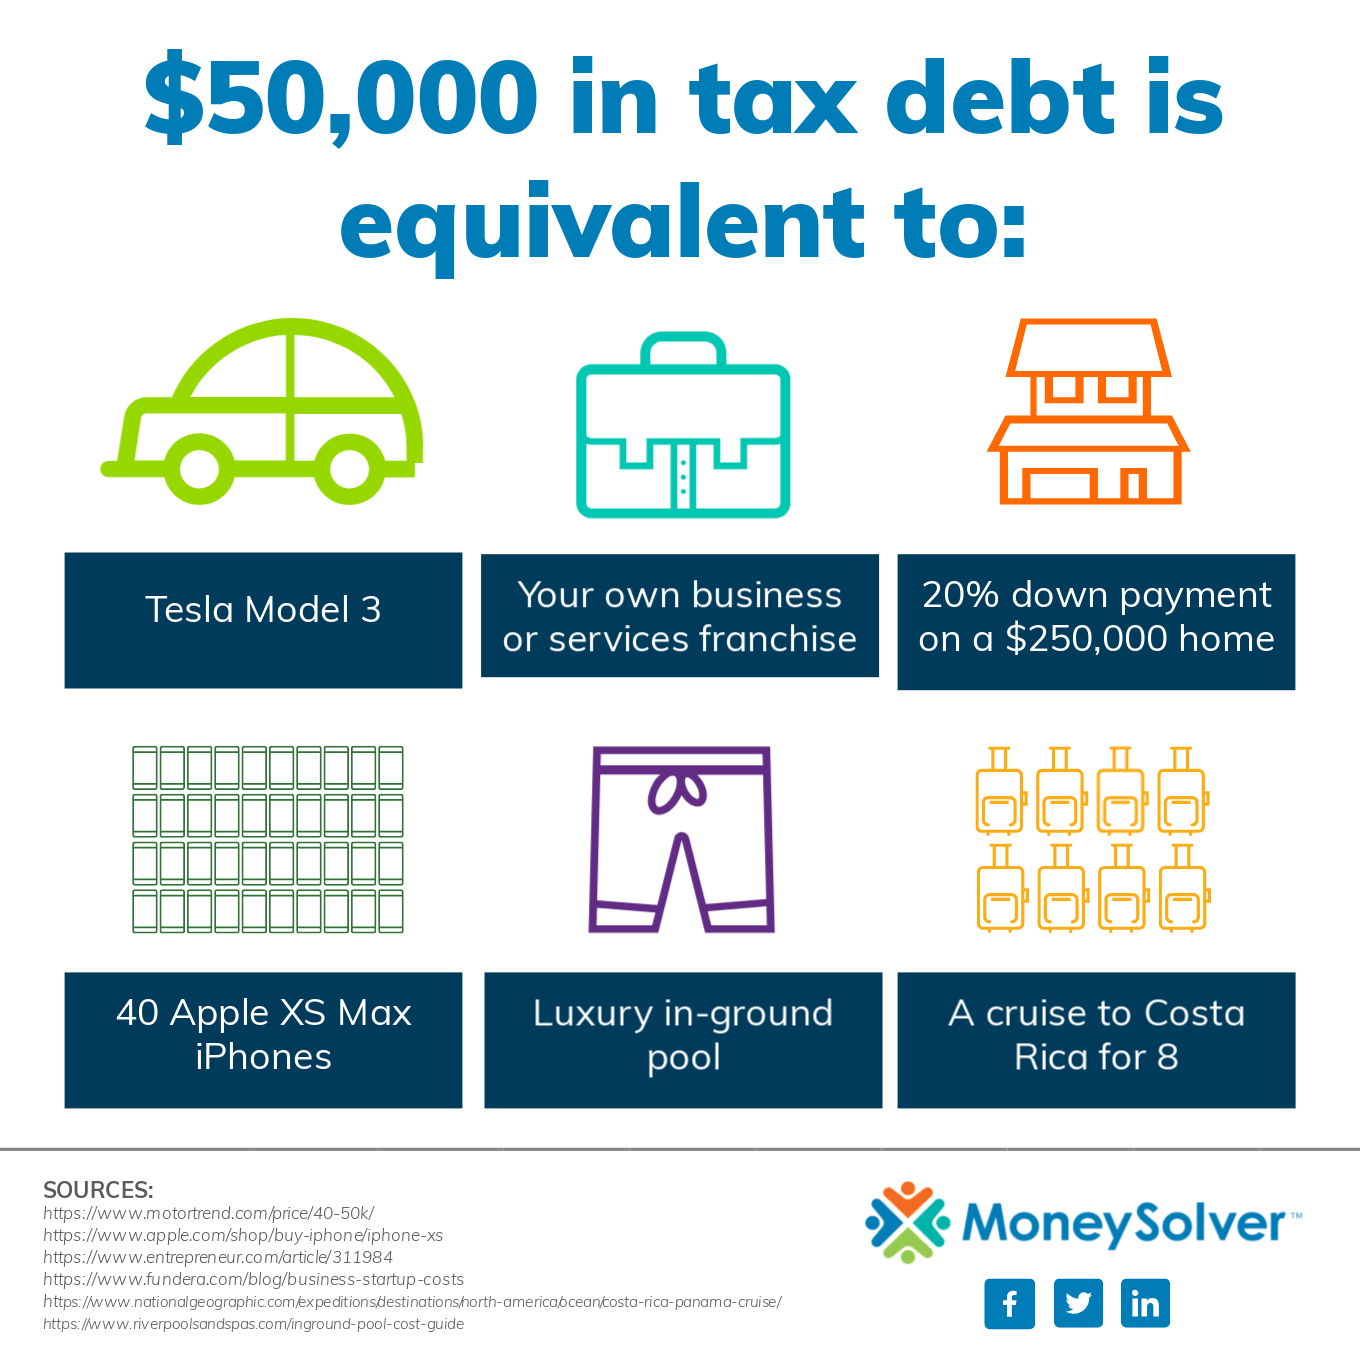 #PayMyTaxes Contest: What is $50,000 in tax debt equivalent to?